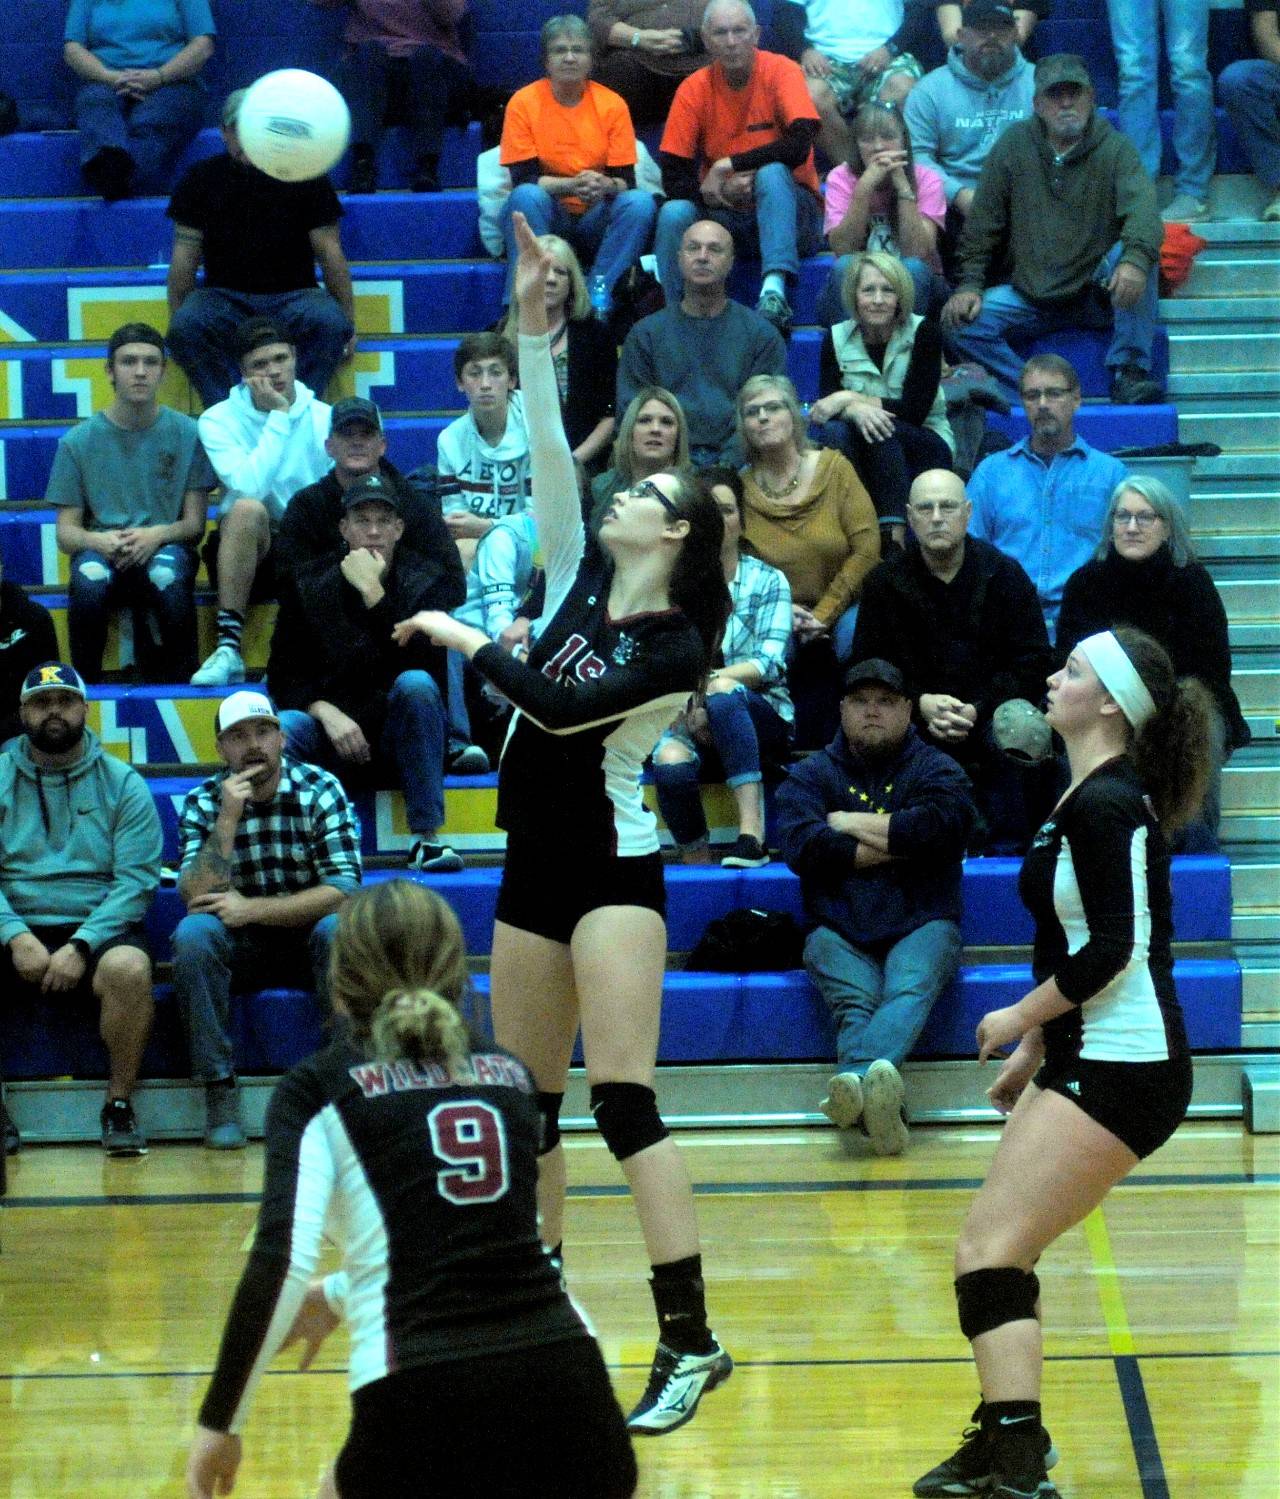 Ocosta’s Kylee Poirer gets her shot over the net in the third set against Kalama. (Hasani Grayson | Grays Harbor News Group)